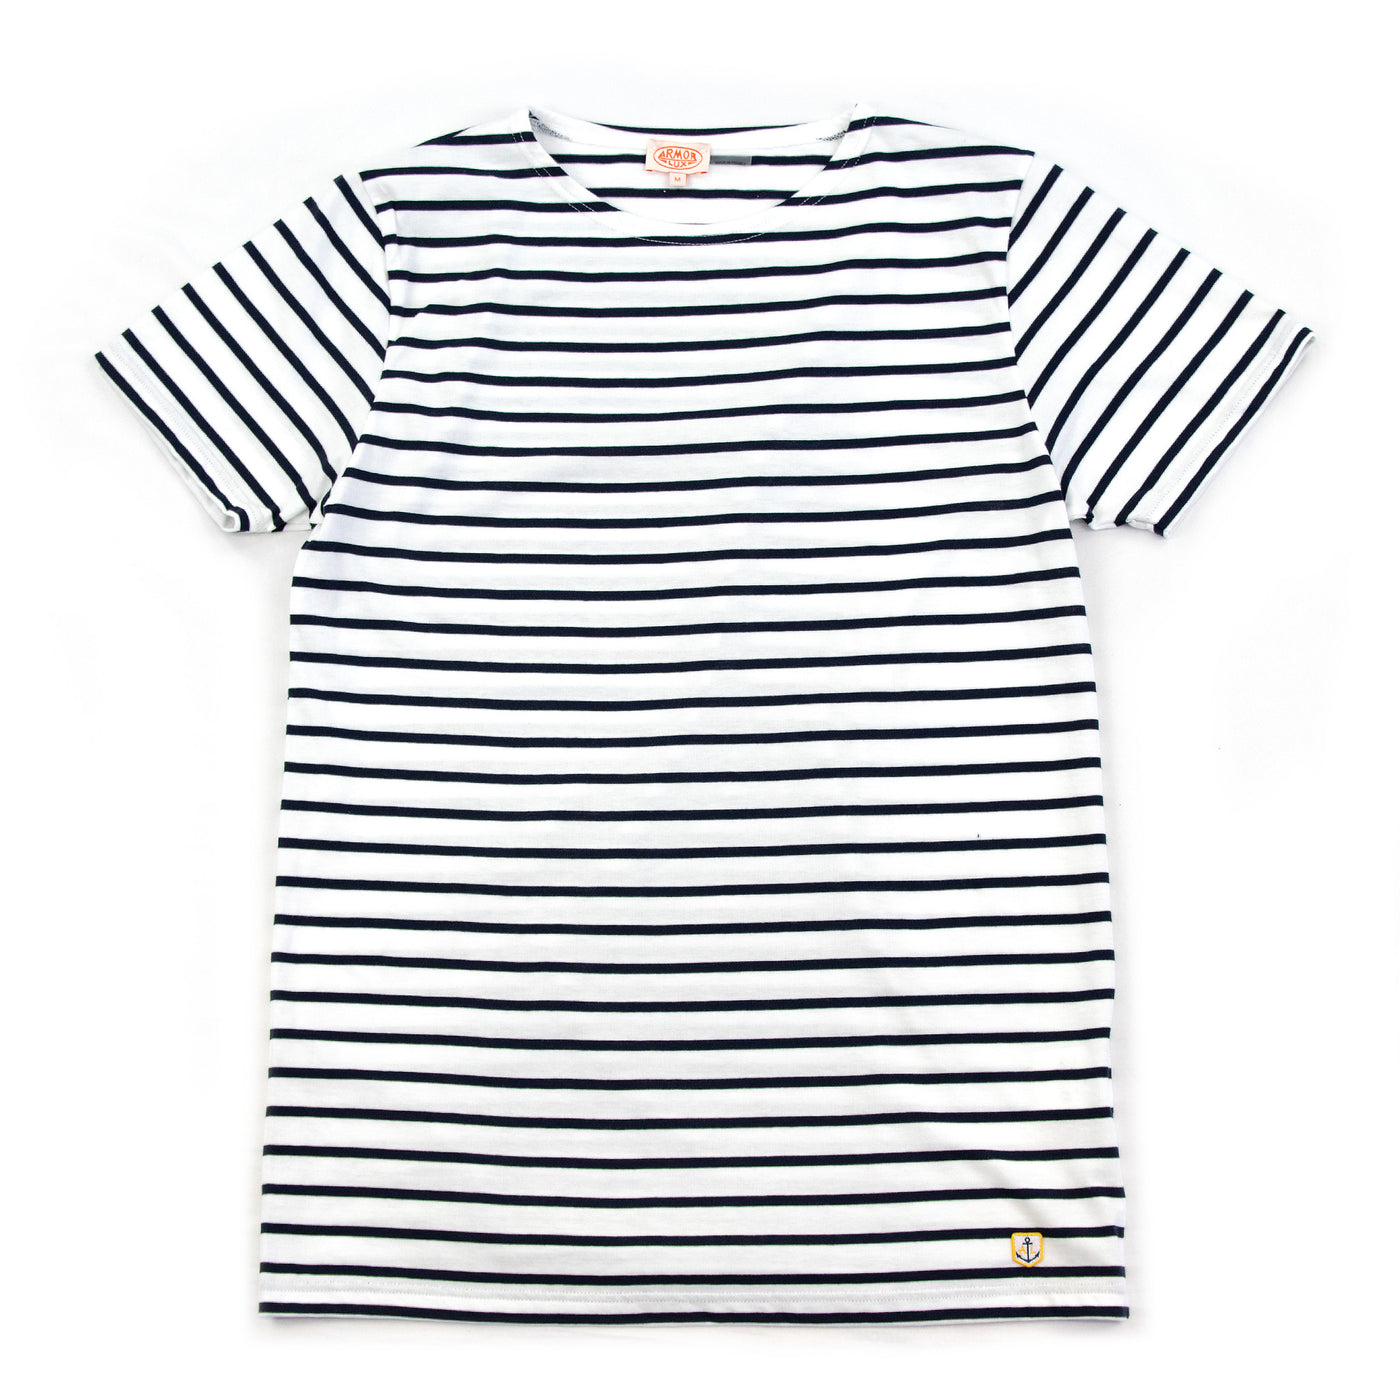 Armor Lux Sailor Mariniere Hoedic T-Shirt White / Navy Front